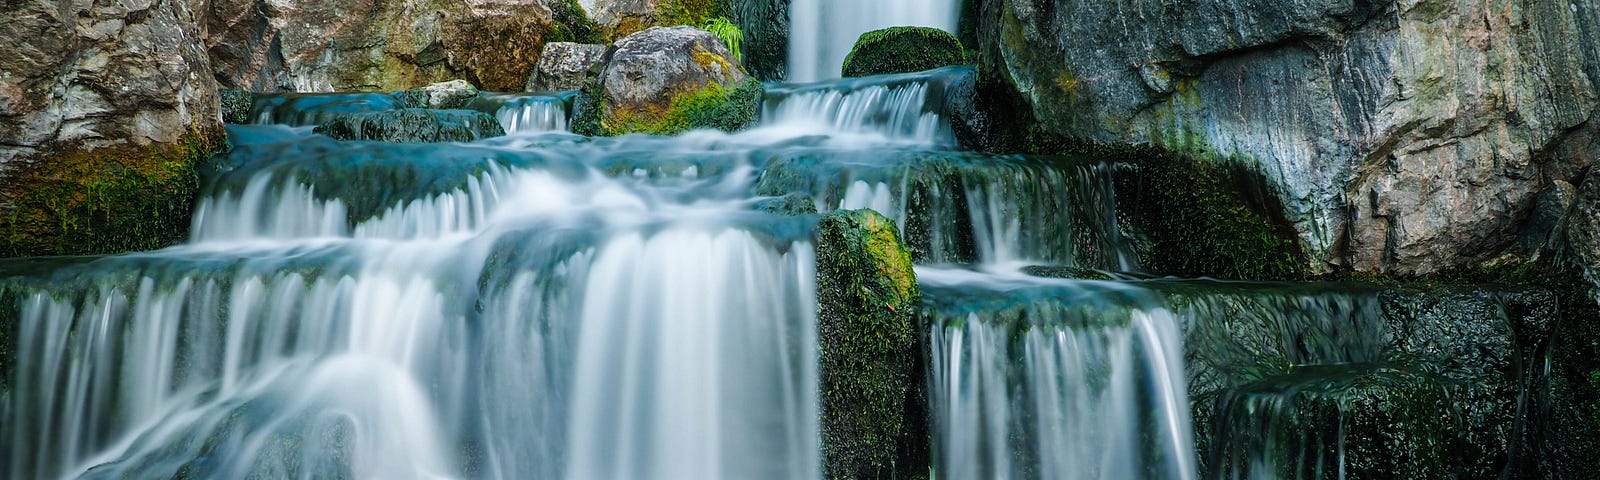 An image of a waterfall.